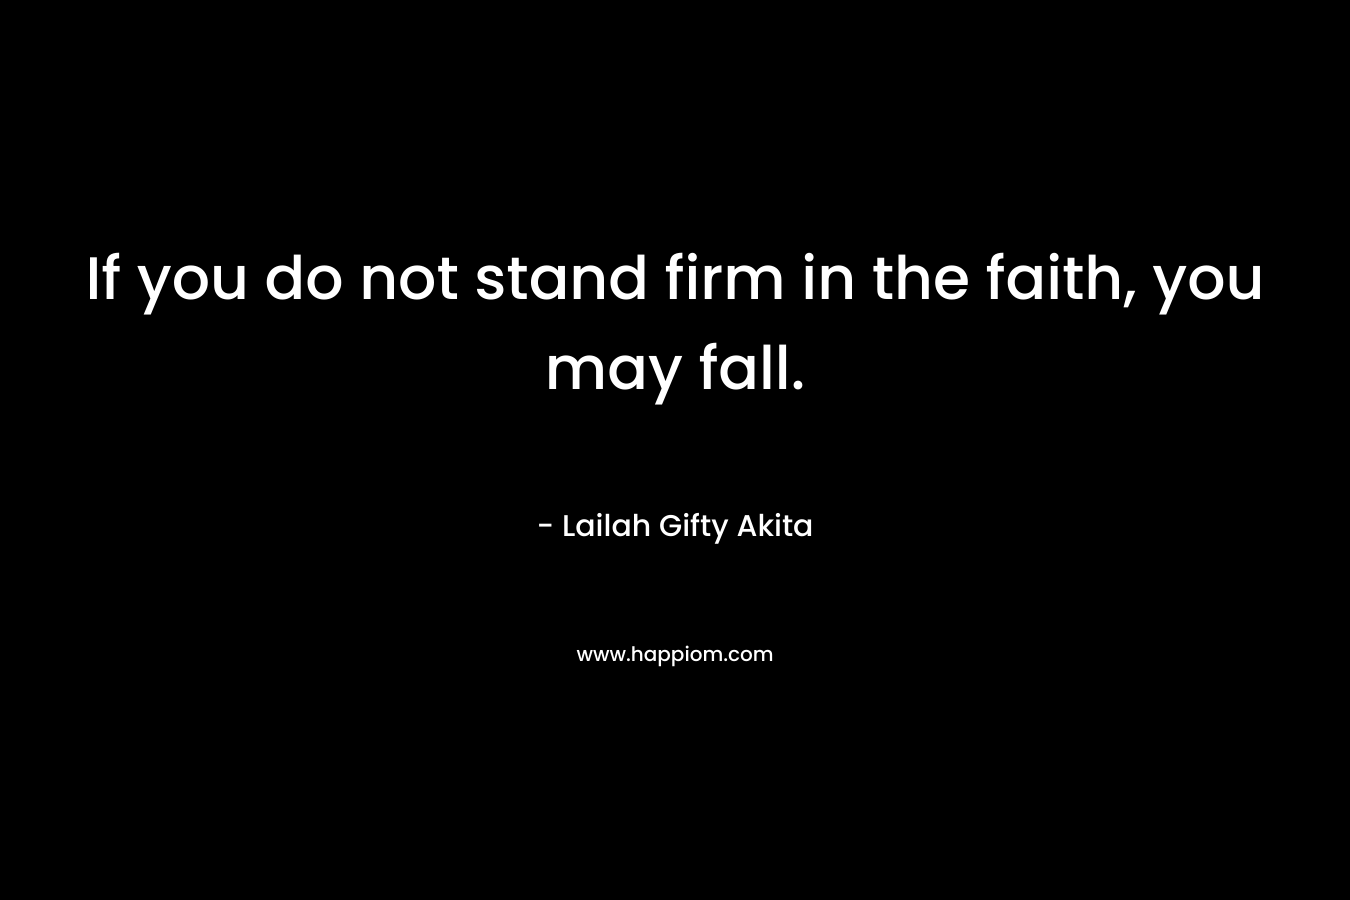 If you do not stand firm in the faith, you may fall.